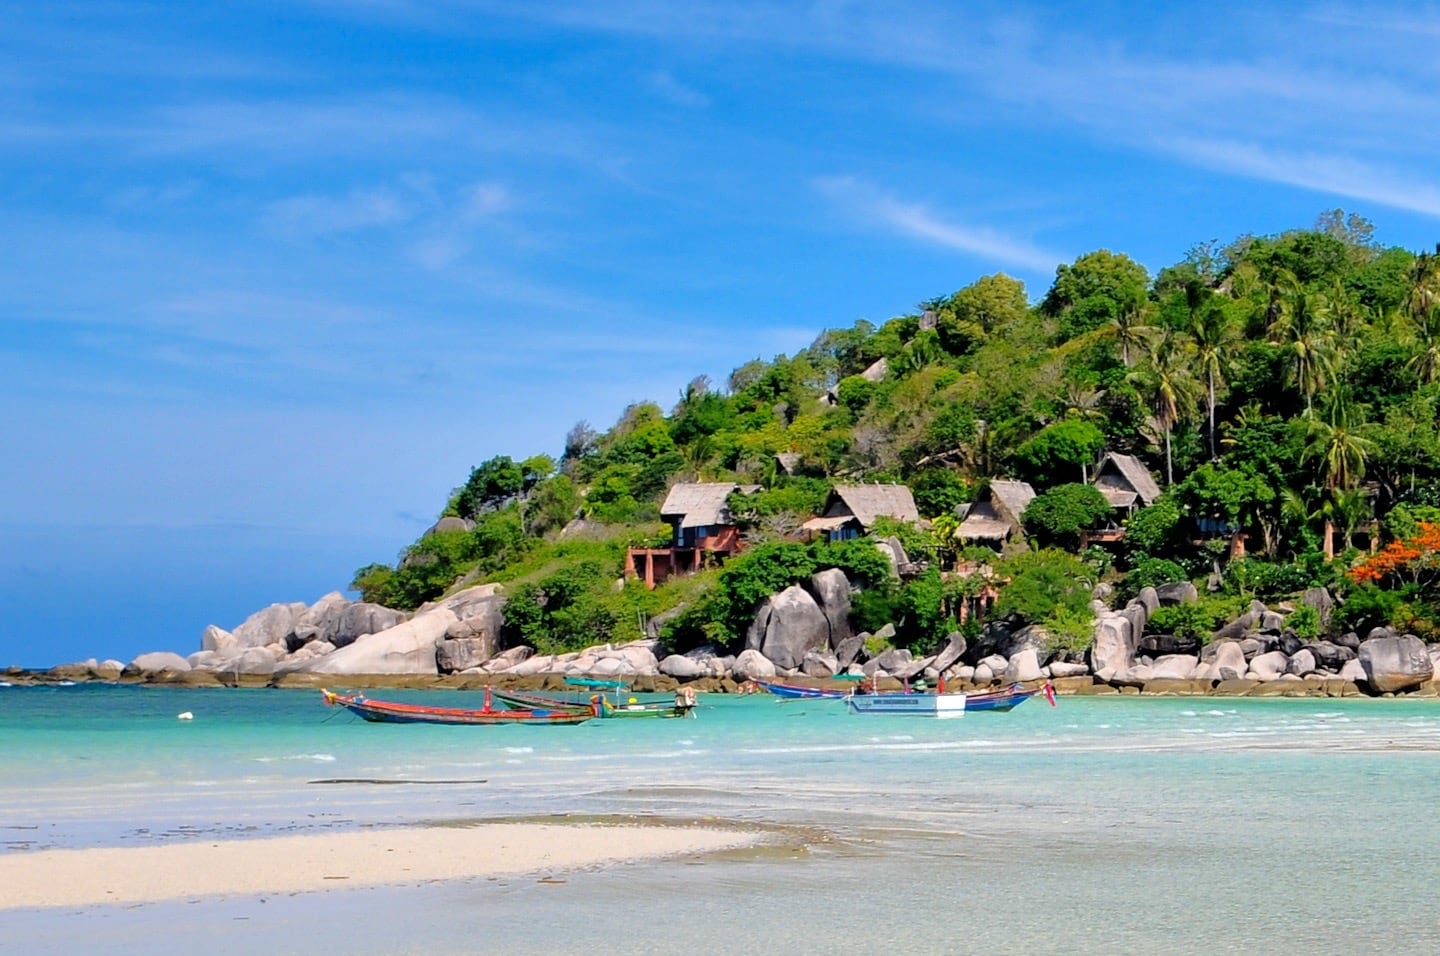 Sairee Beach and Sairee Village on the island of Koh Tao in Thailand